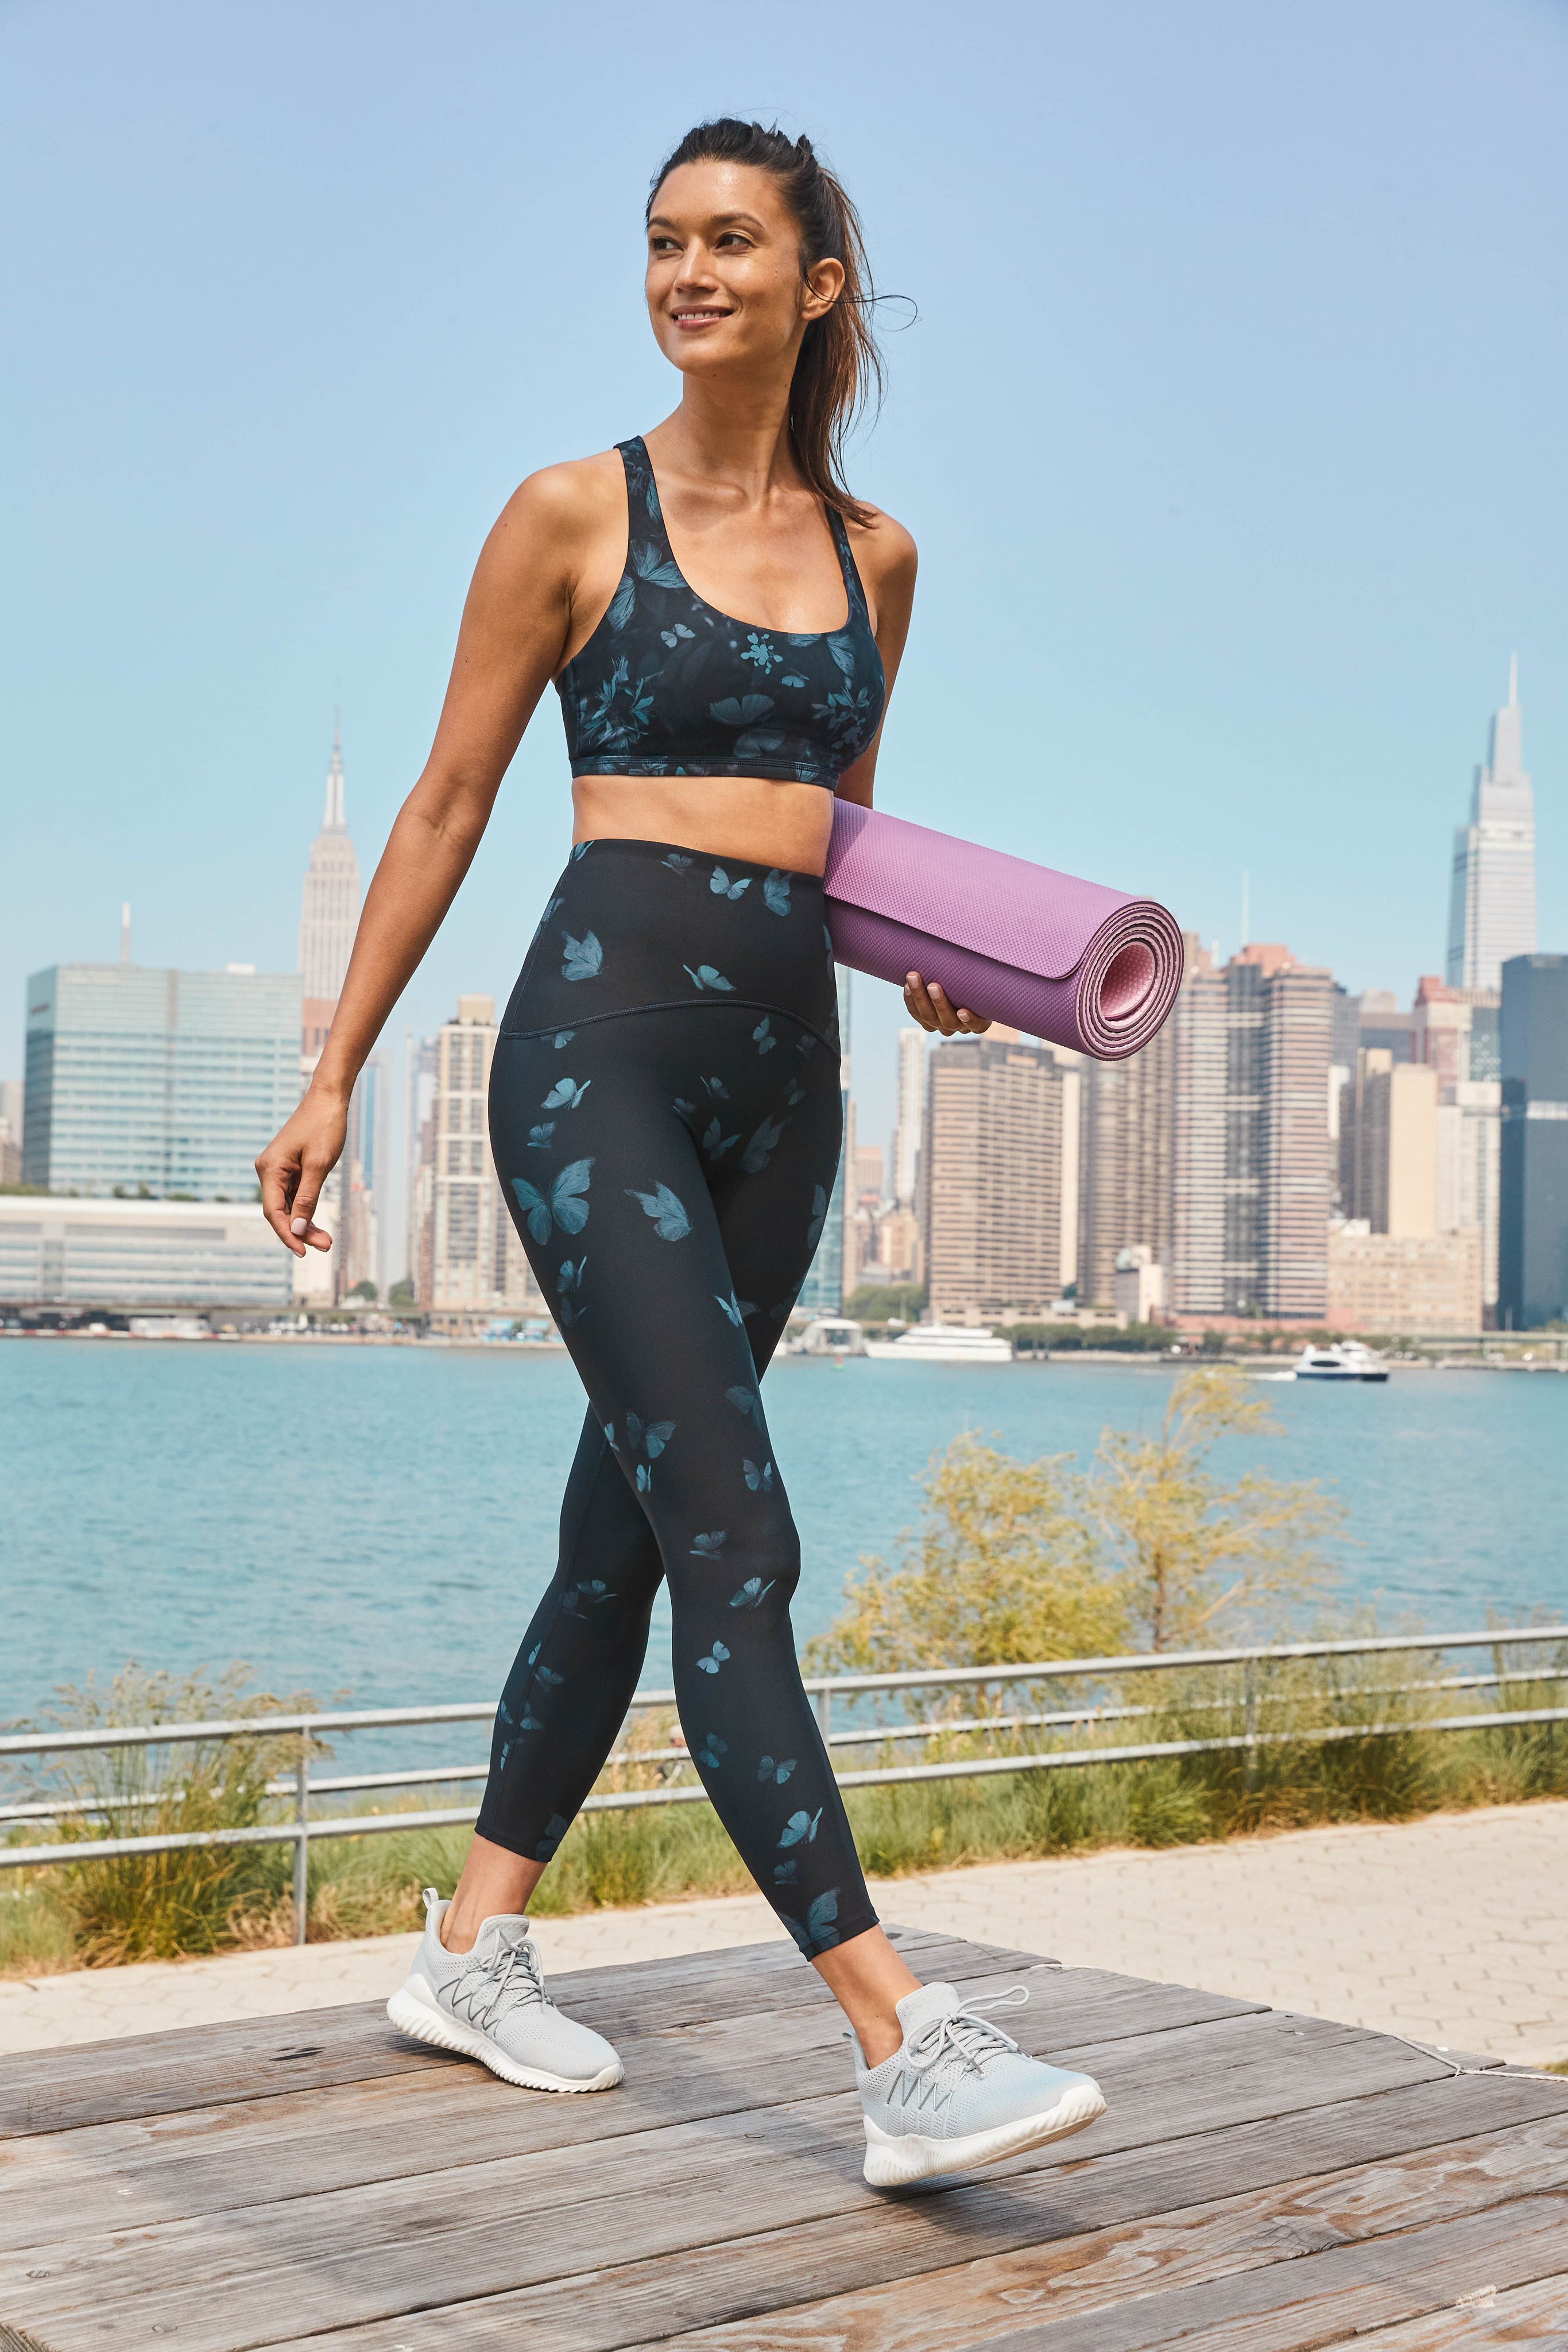 Decked Out in SPANX Activewear by Sarah Blakely